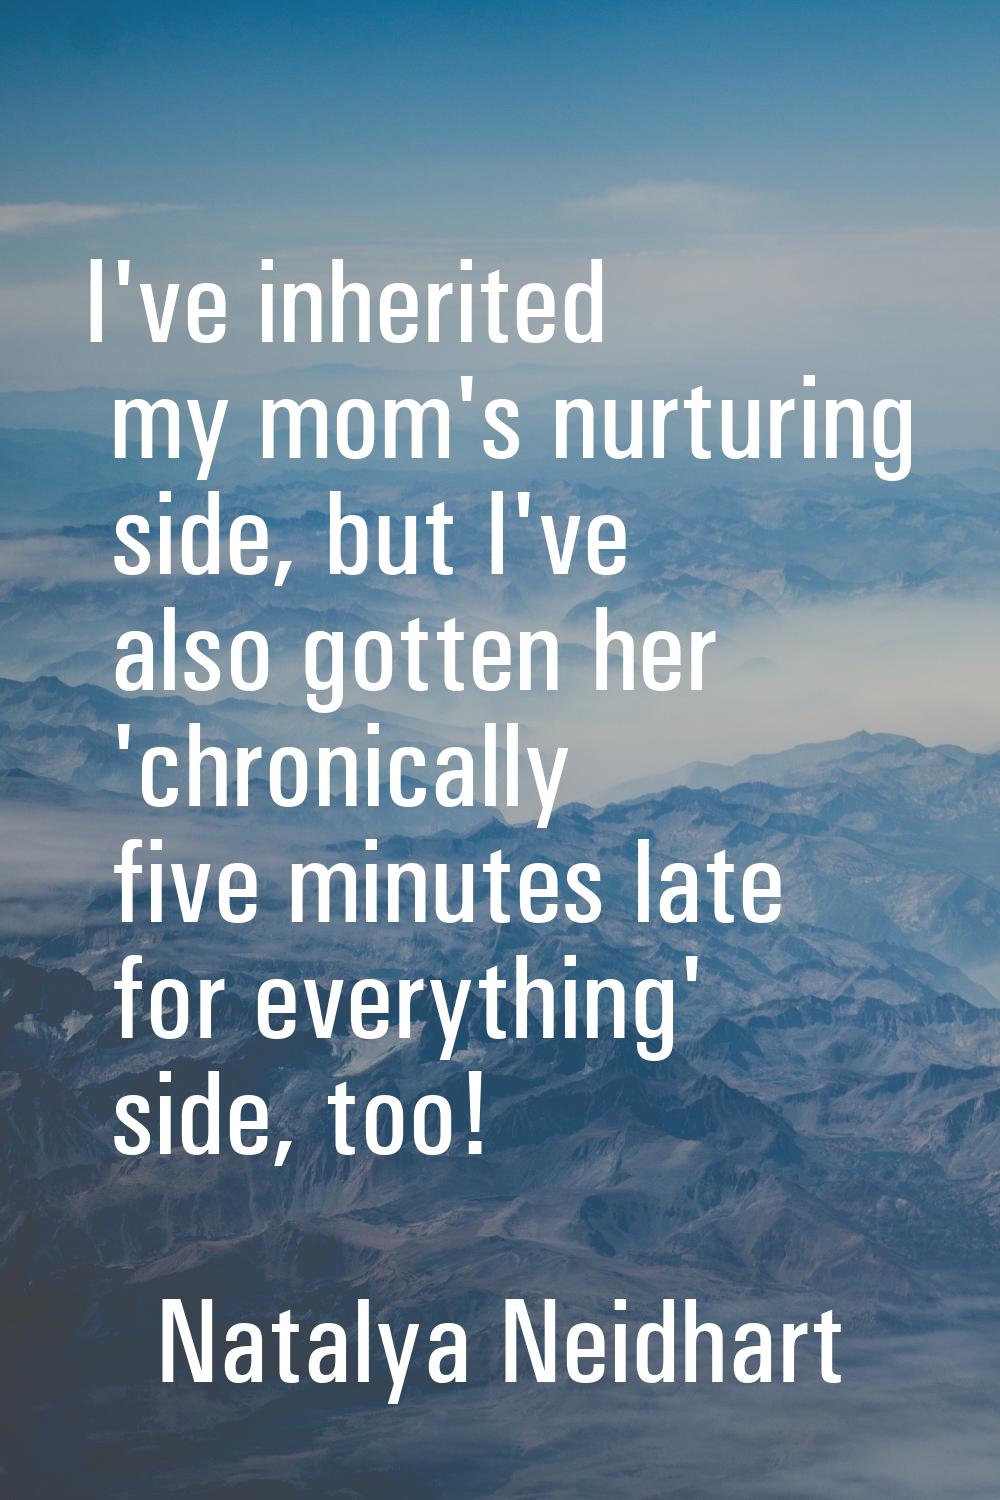 I've inherited my mom's nurturing side, but I've also gotten her 'chronically five minutes late for